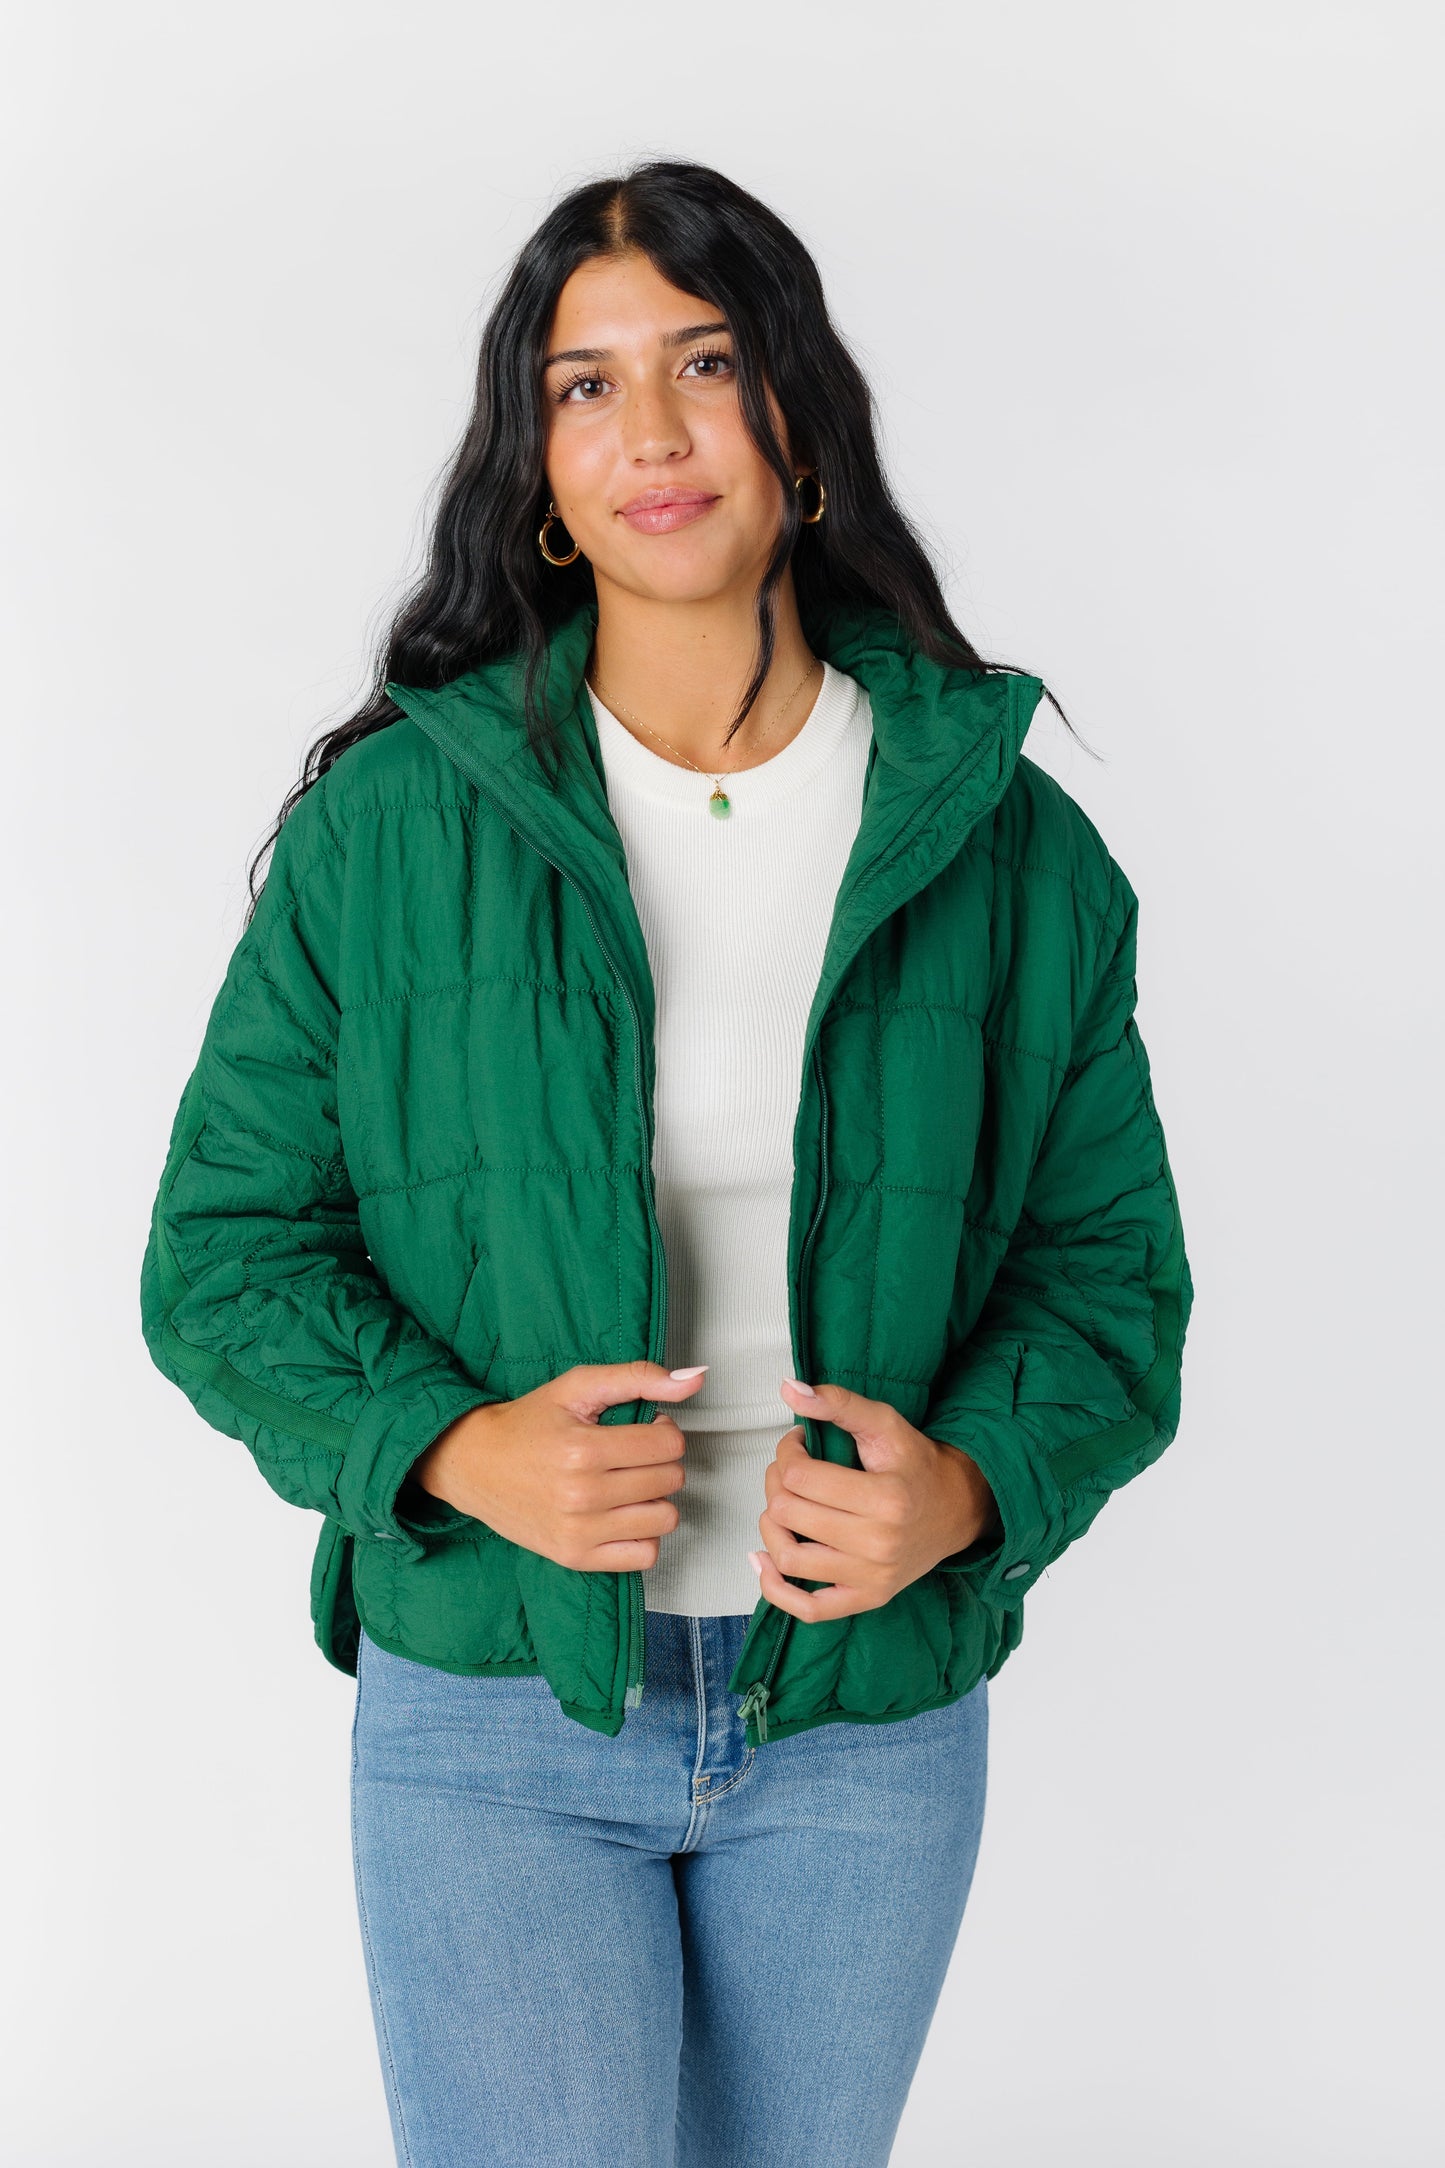 Pippie Packable Puffer Jacket - Fall Colors WOMEN'S JACKETS Veveret 